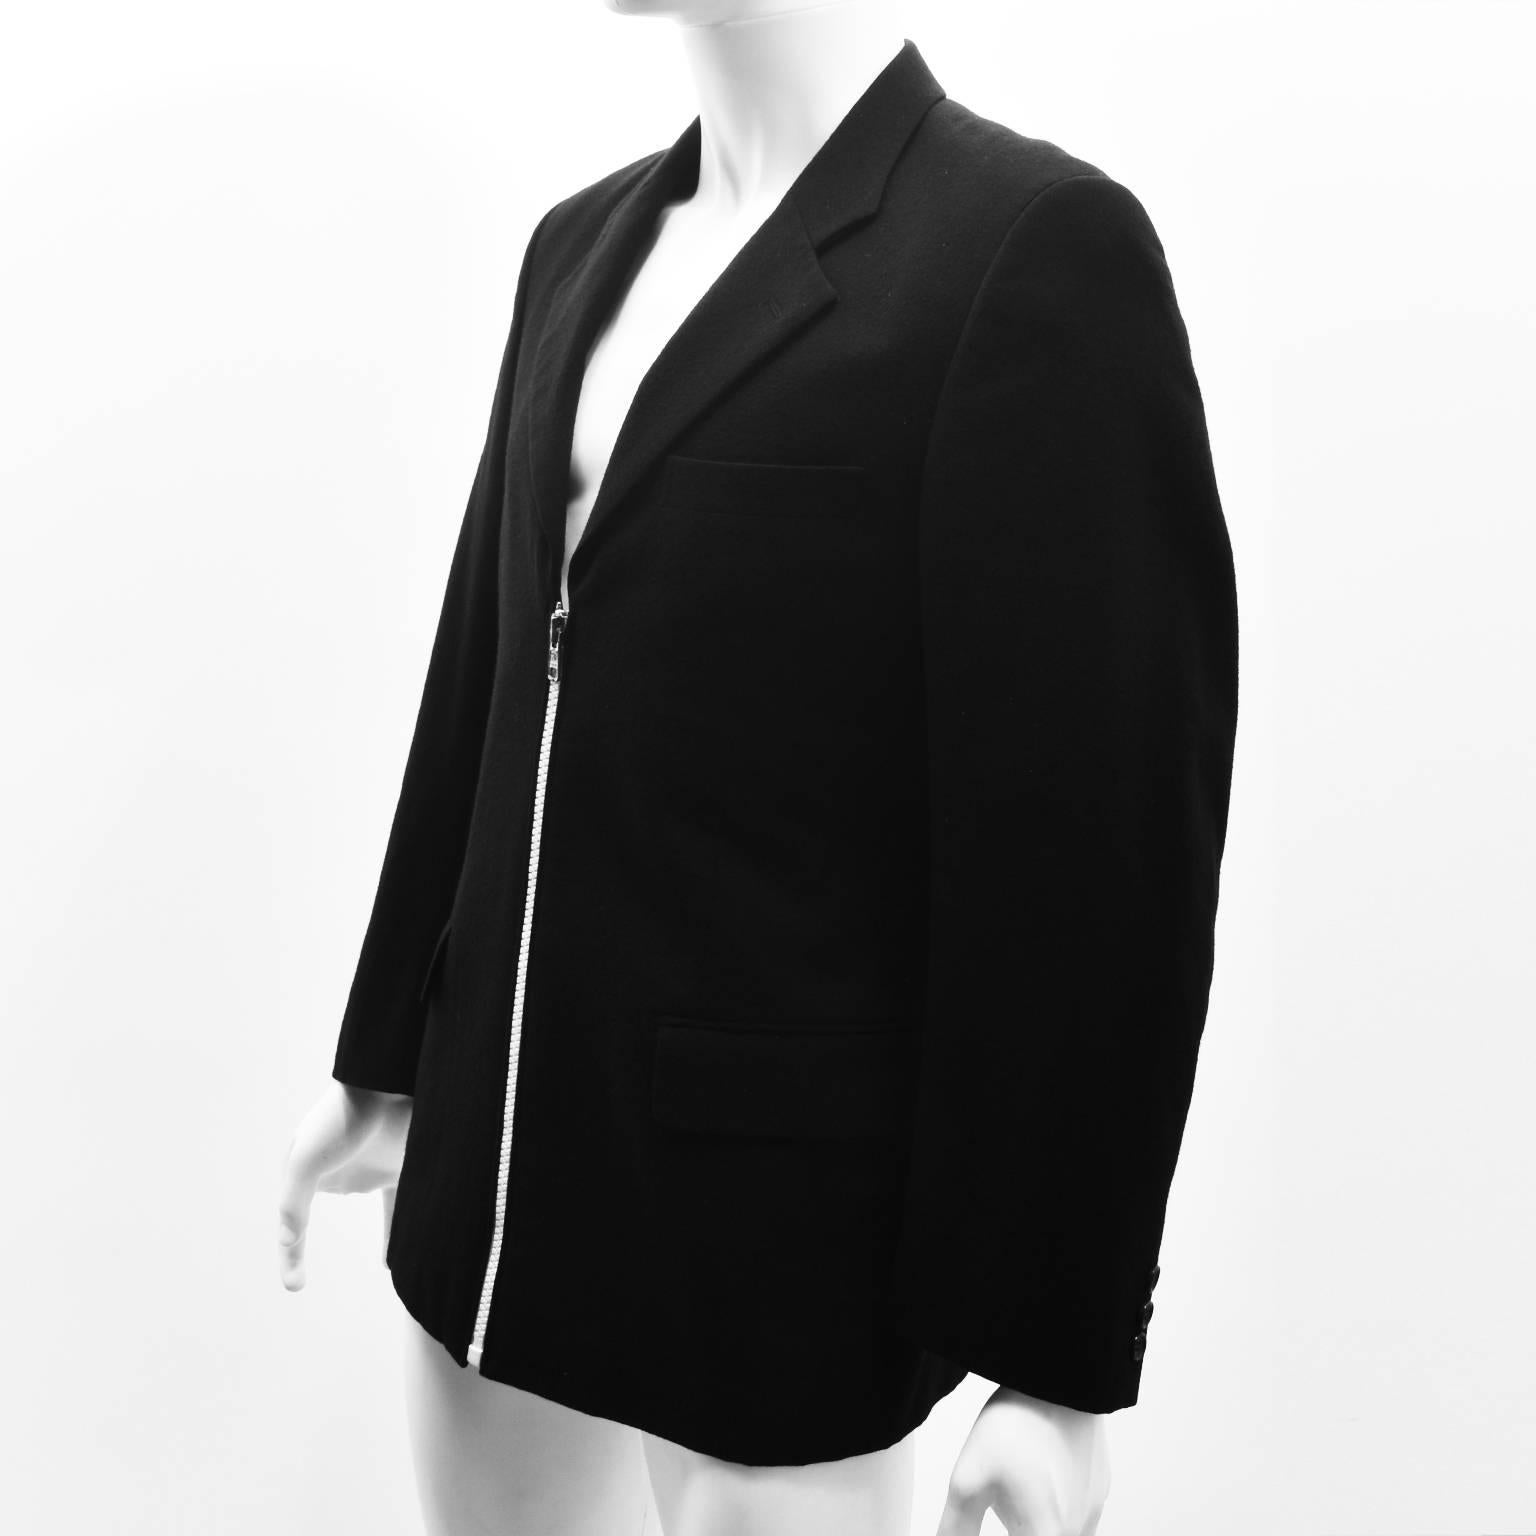 A classic black blazer with a twist from Comme des Garcons’ Homme line. The blazer has a simple, straight cut with notched collar and pockets at the hip. It also features a central chunky zip in a contrast white colour creating a contemporary and